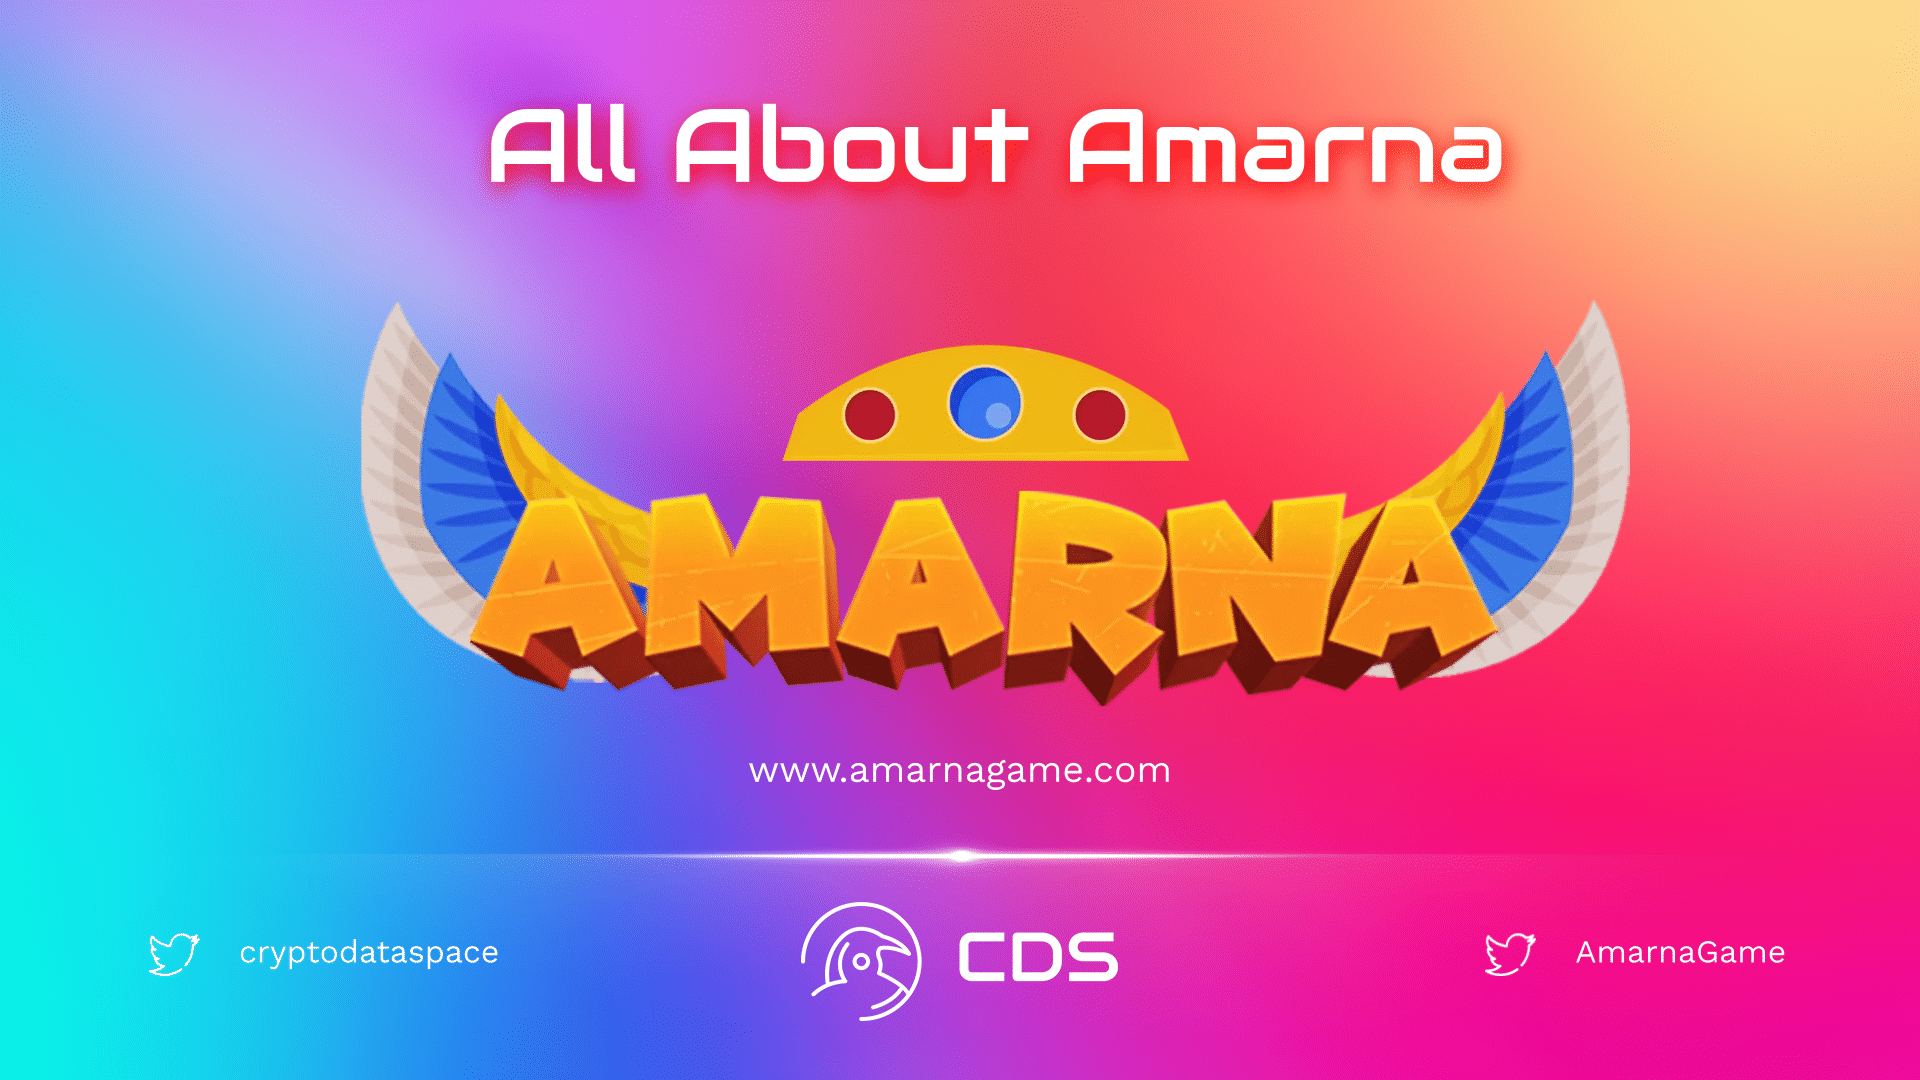 All About Amarna